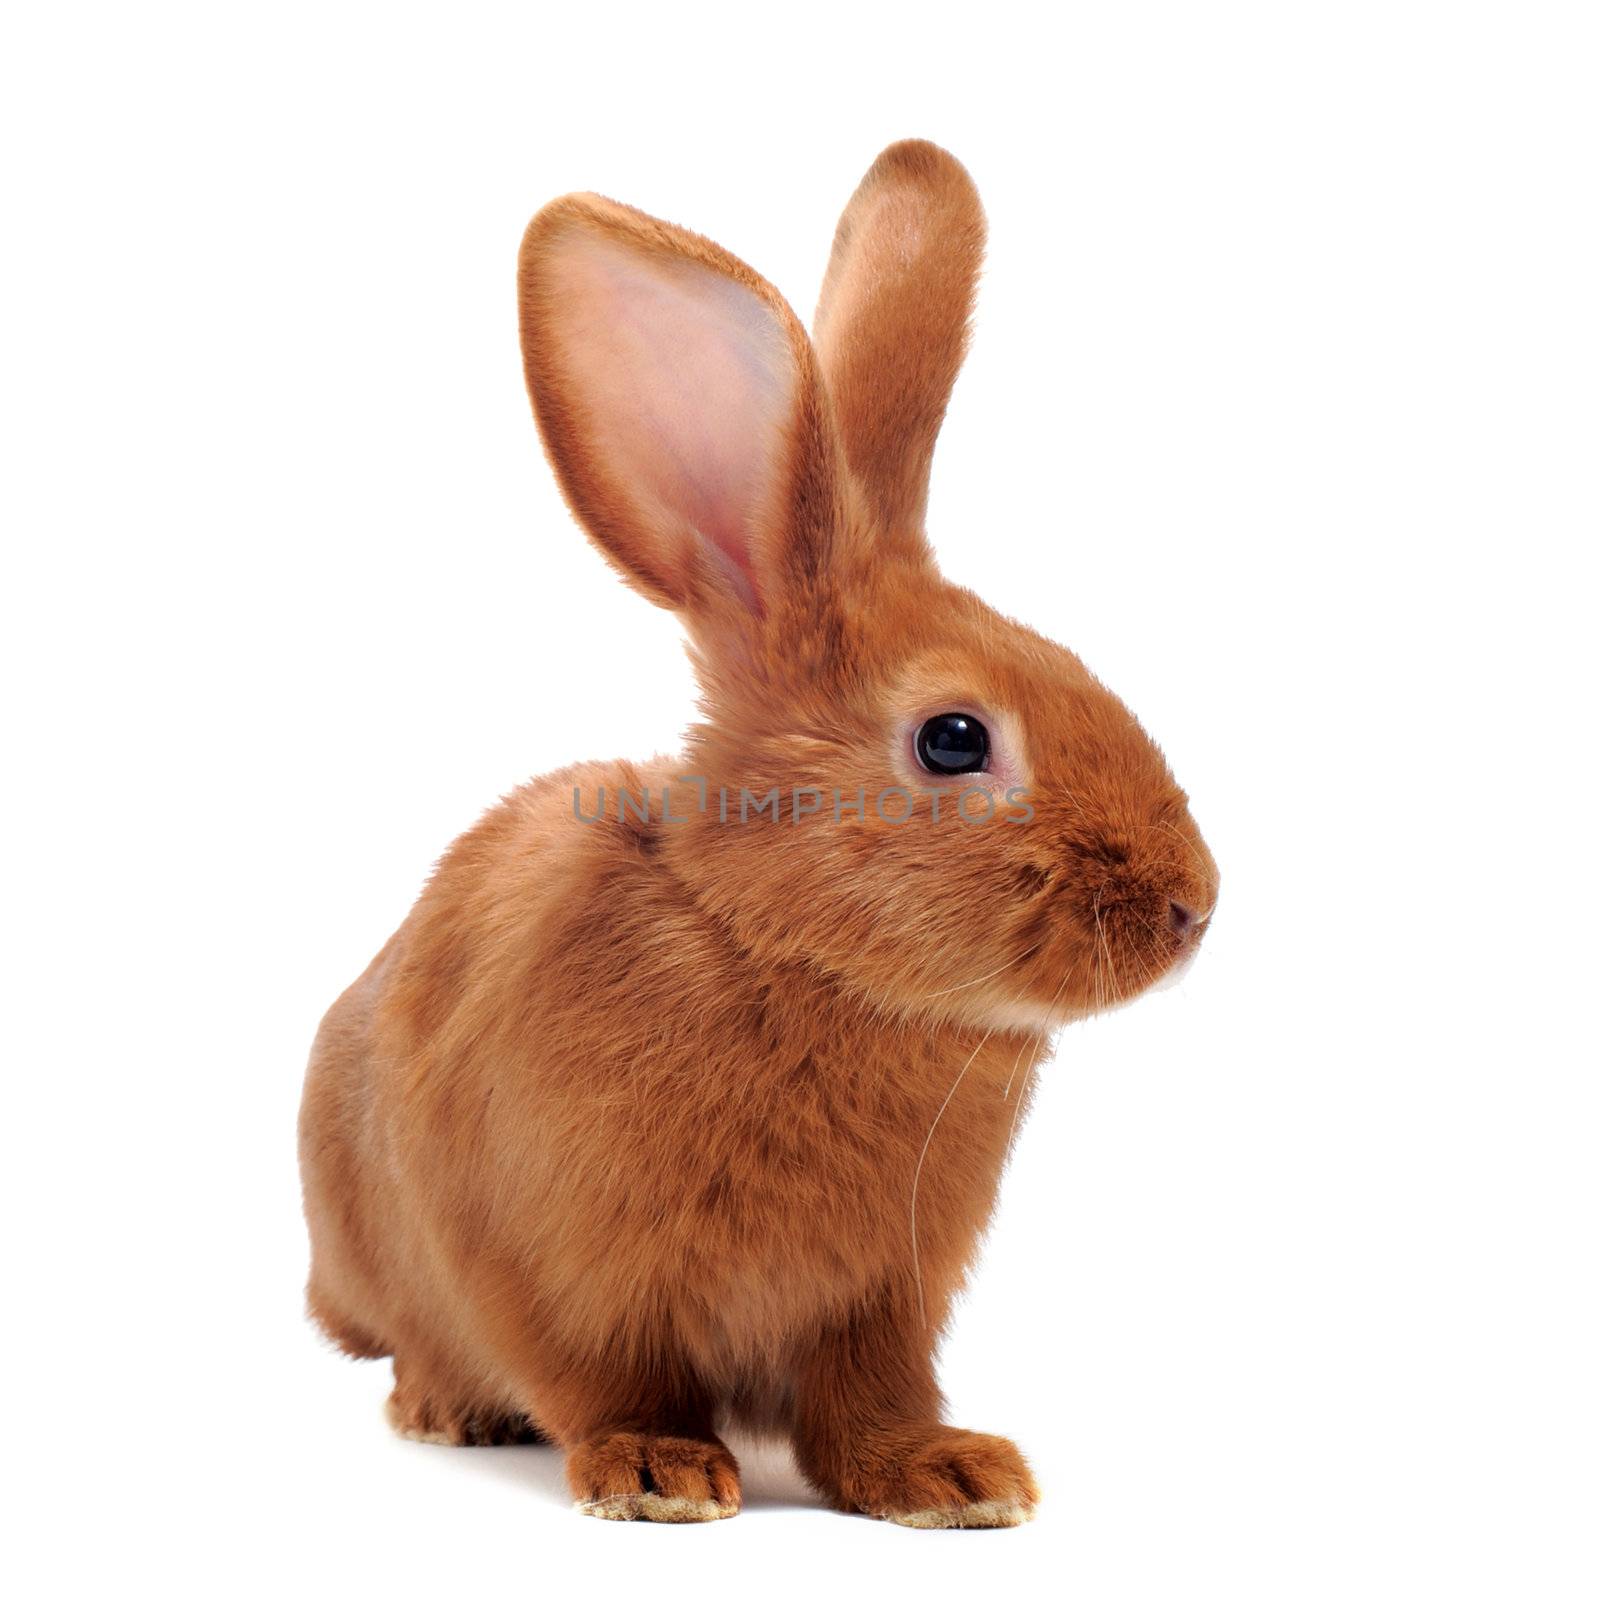 young rabbit sitting in front of white background